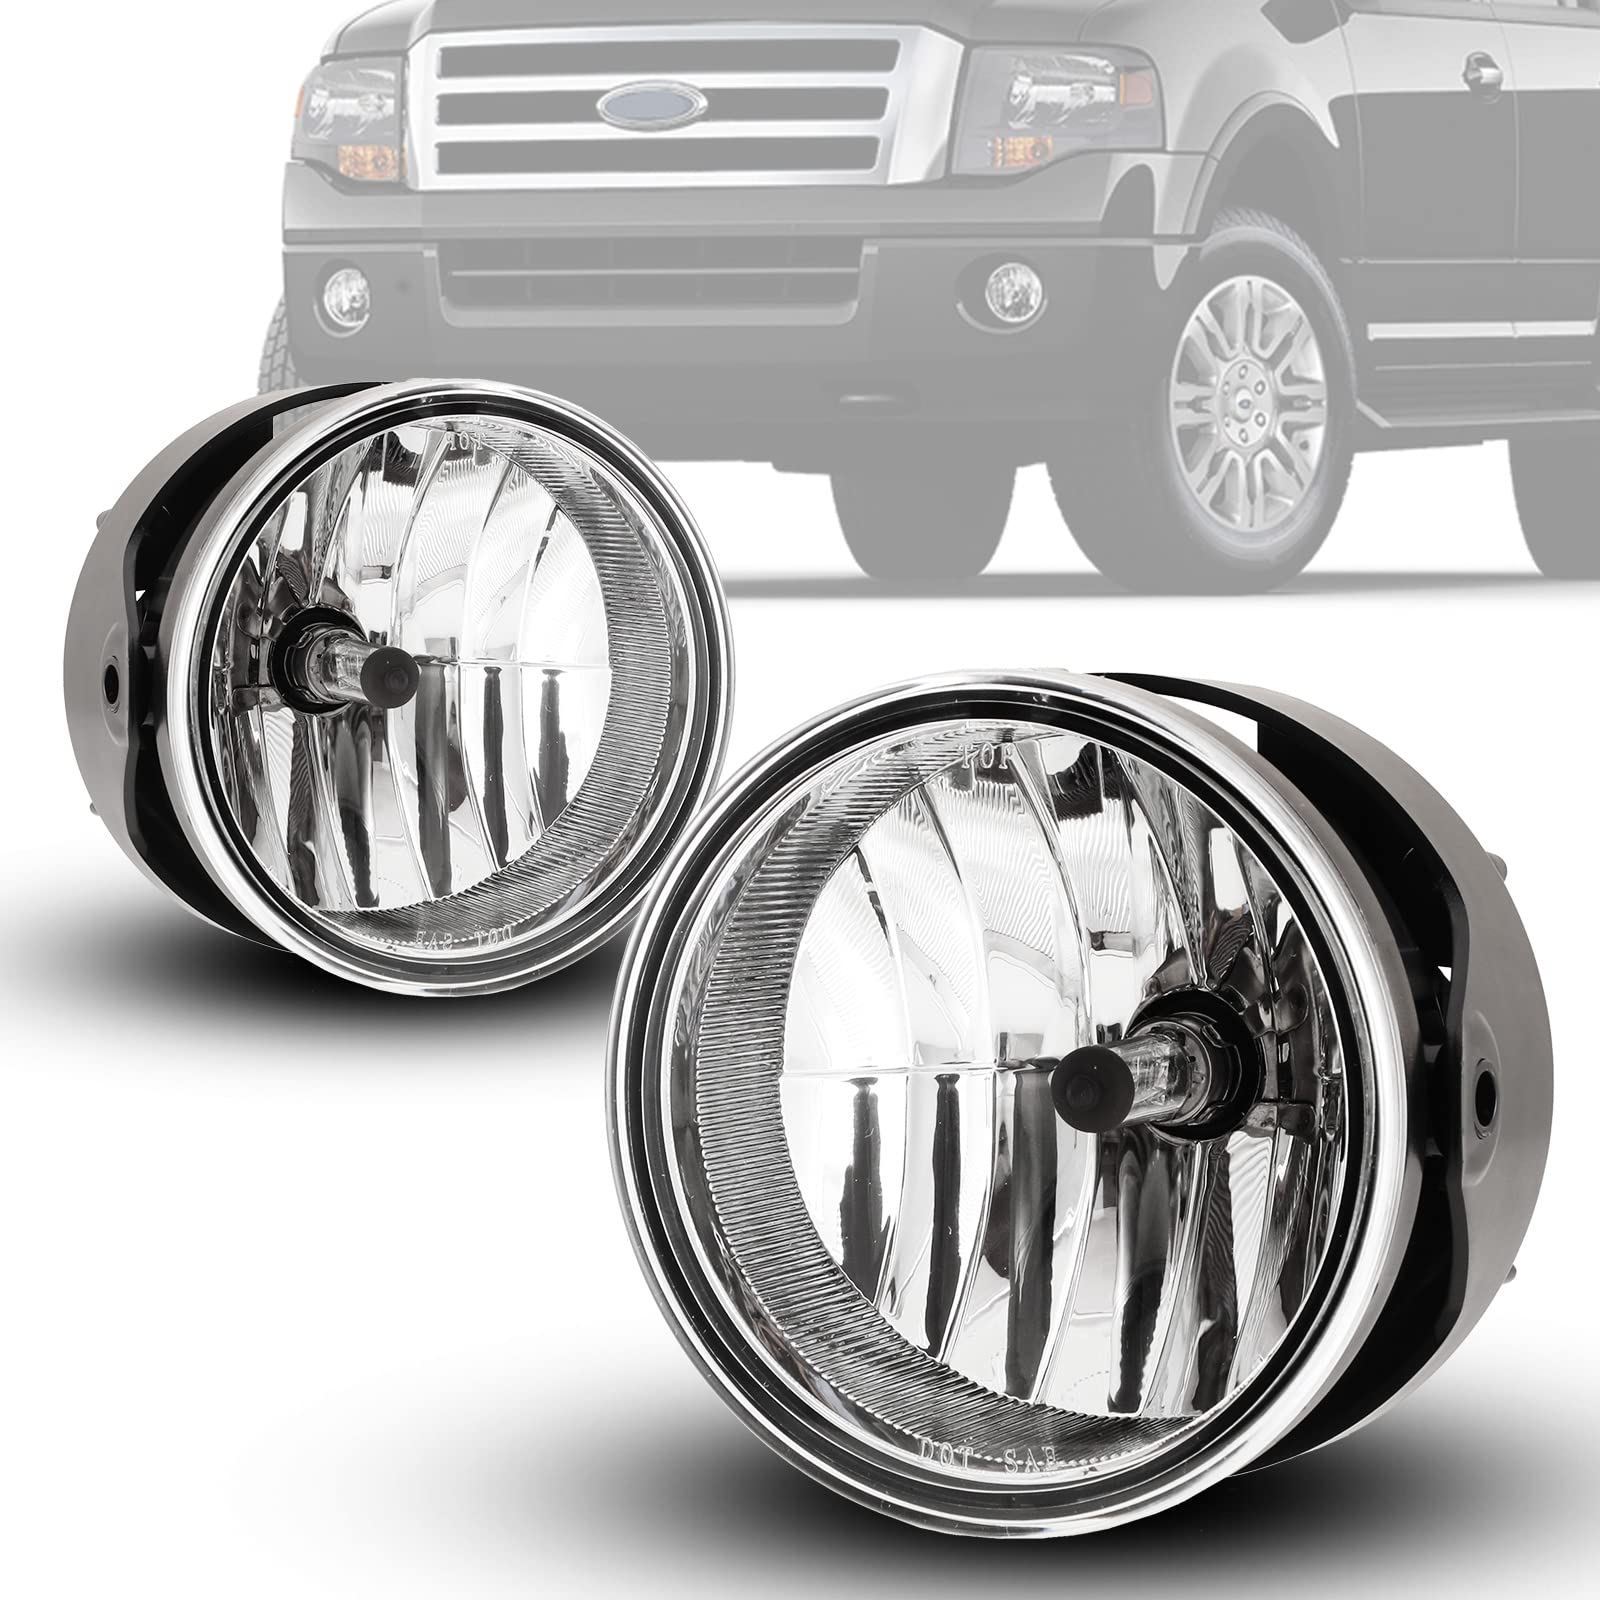 AUTOFREE Fog Lights for 2008-2011 Ford Ranger (not fit STX package)/  2007-2014 Expedition with Bulbs H10 12V 42W OE Driving Lamps Replacement  for Pickup-1 Pair(Clear Lens)